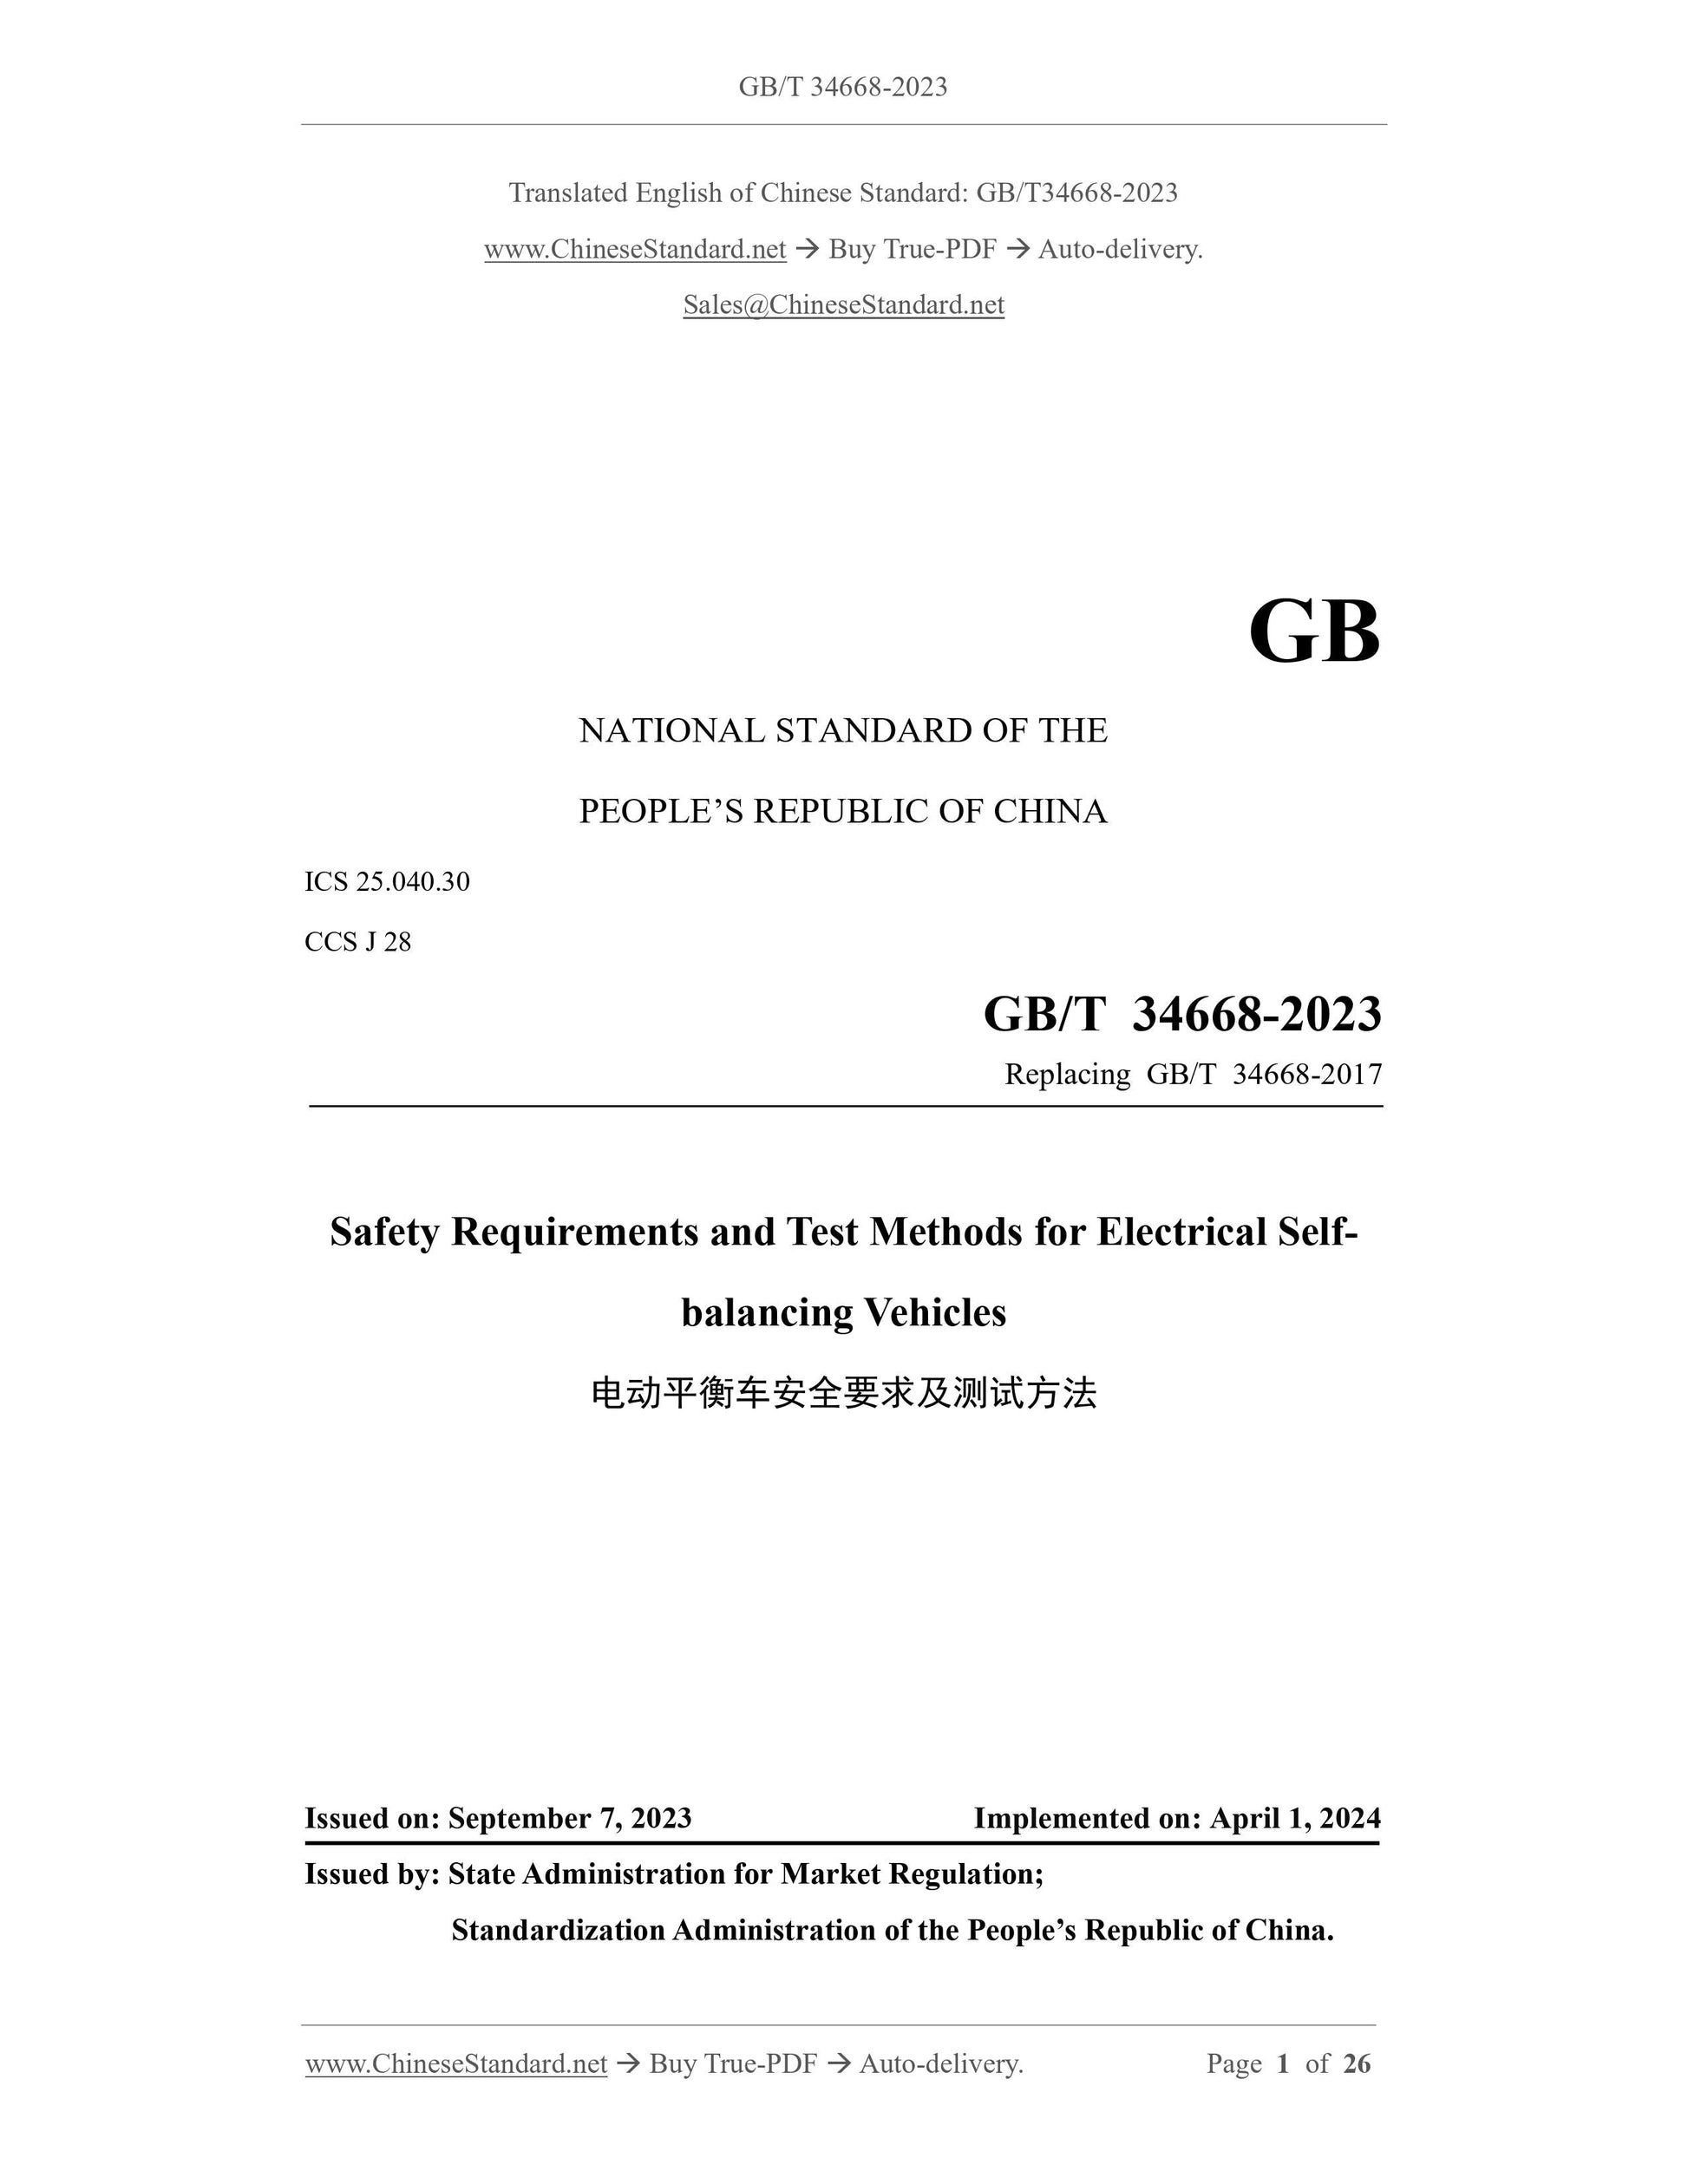 GB/T 34668-2023 Page 1